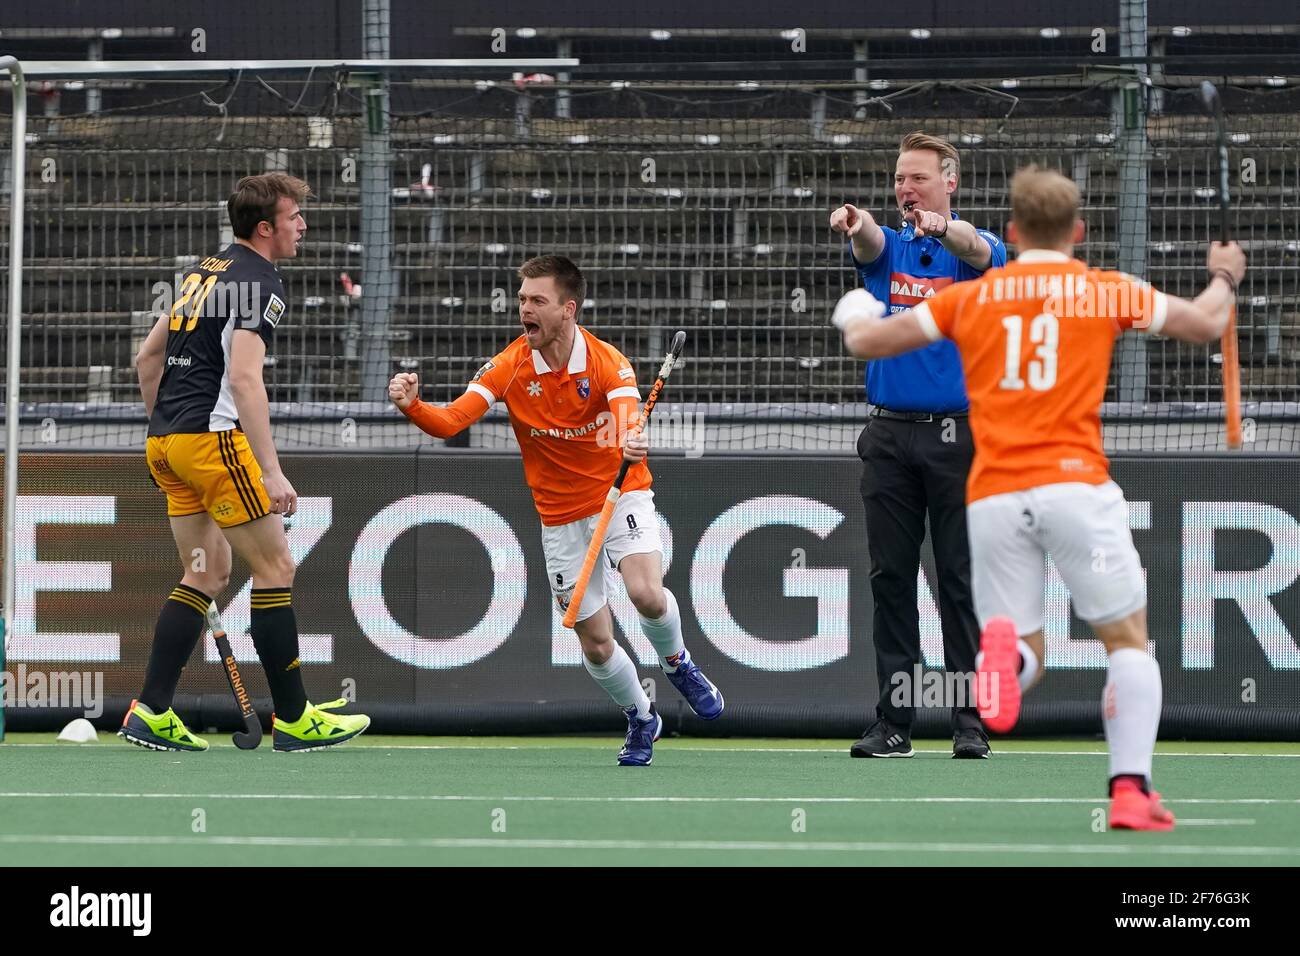 AMSTELVEEN, NETHERLANDS - APRIL 5: Thierry Brinkman of Bloemendaal celebrates after scoring his sides second goal during the Euro Hockey League Final match between Atletic Terrassa HC and Bloemendaal at Wagener Stadion on April 5, 2021 in Amstelveen, Netherlands (Photo by Andre Weening/Orange Pictures) Stock Photo